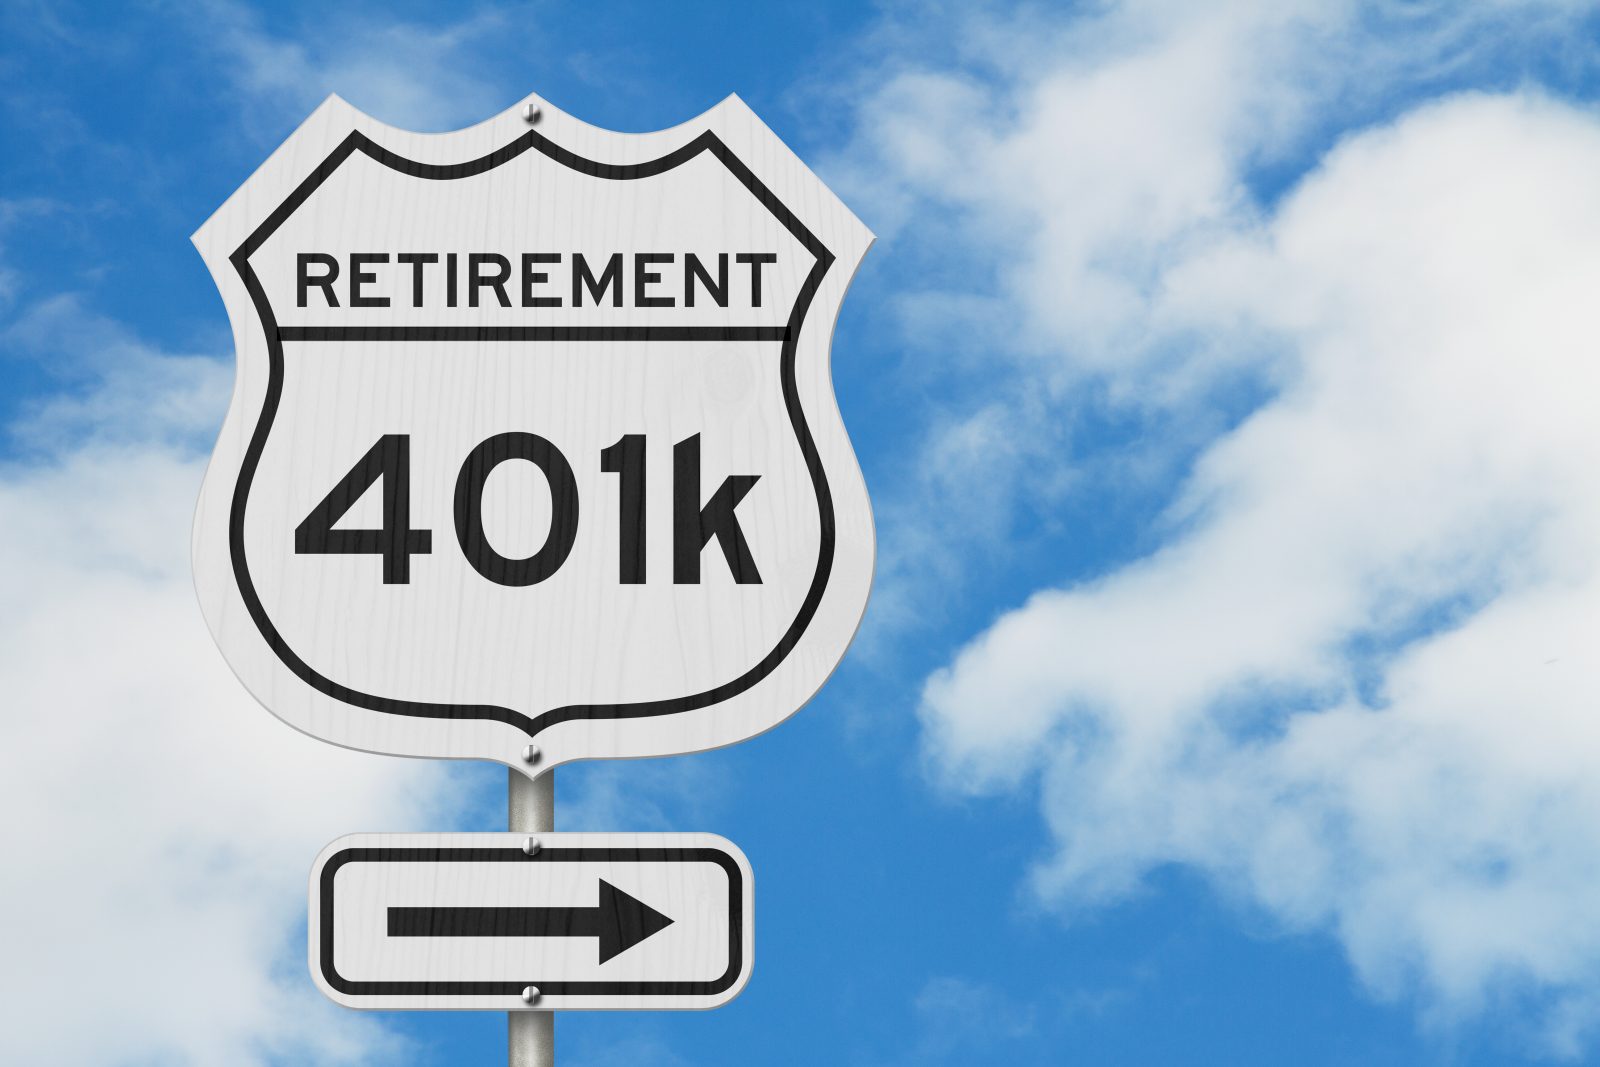 7 Reasons to Make Your 401(k) a Priority When Retirement Planning